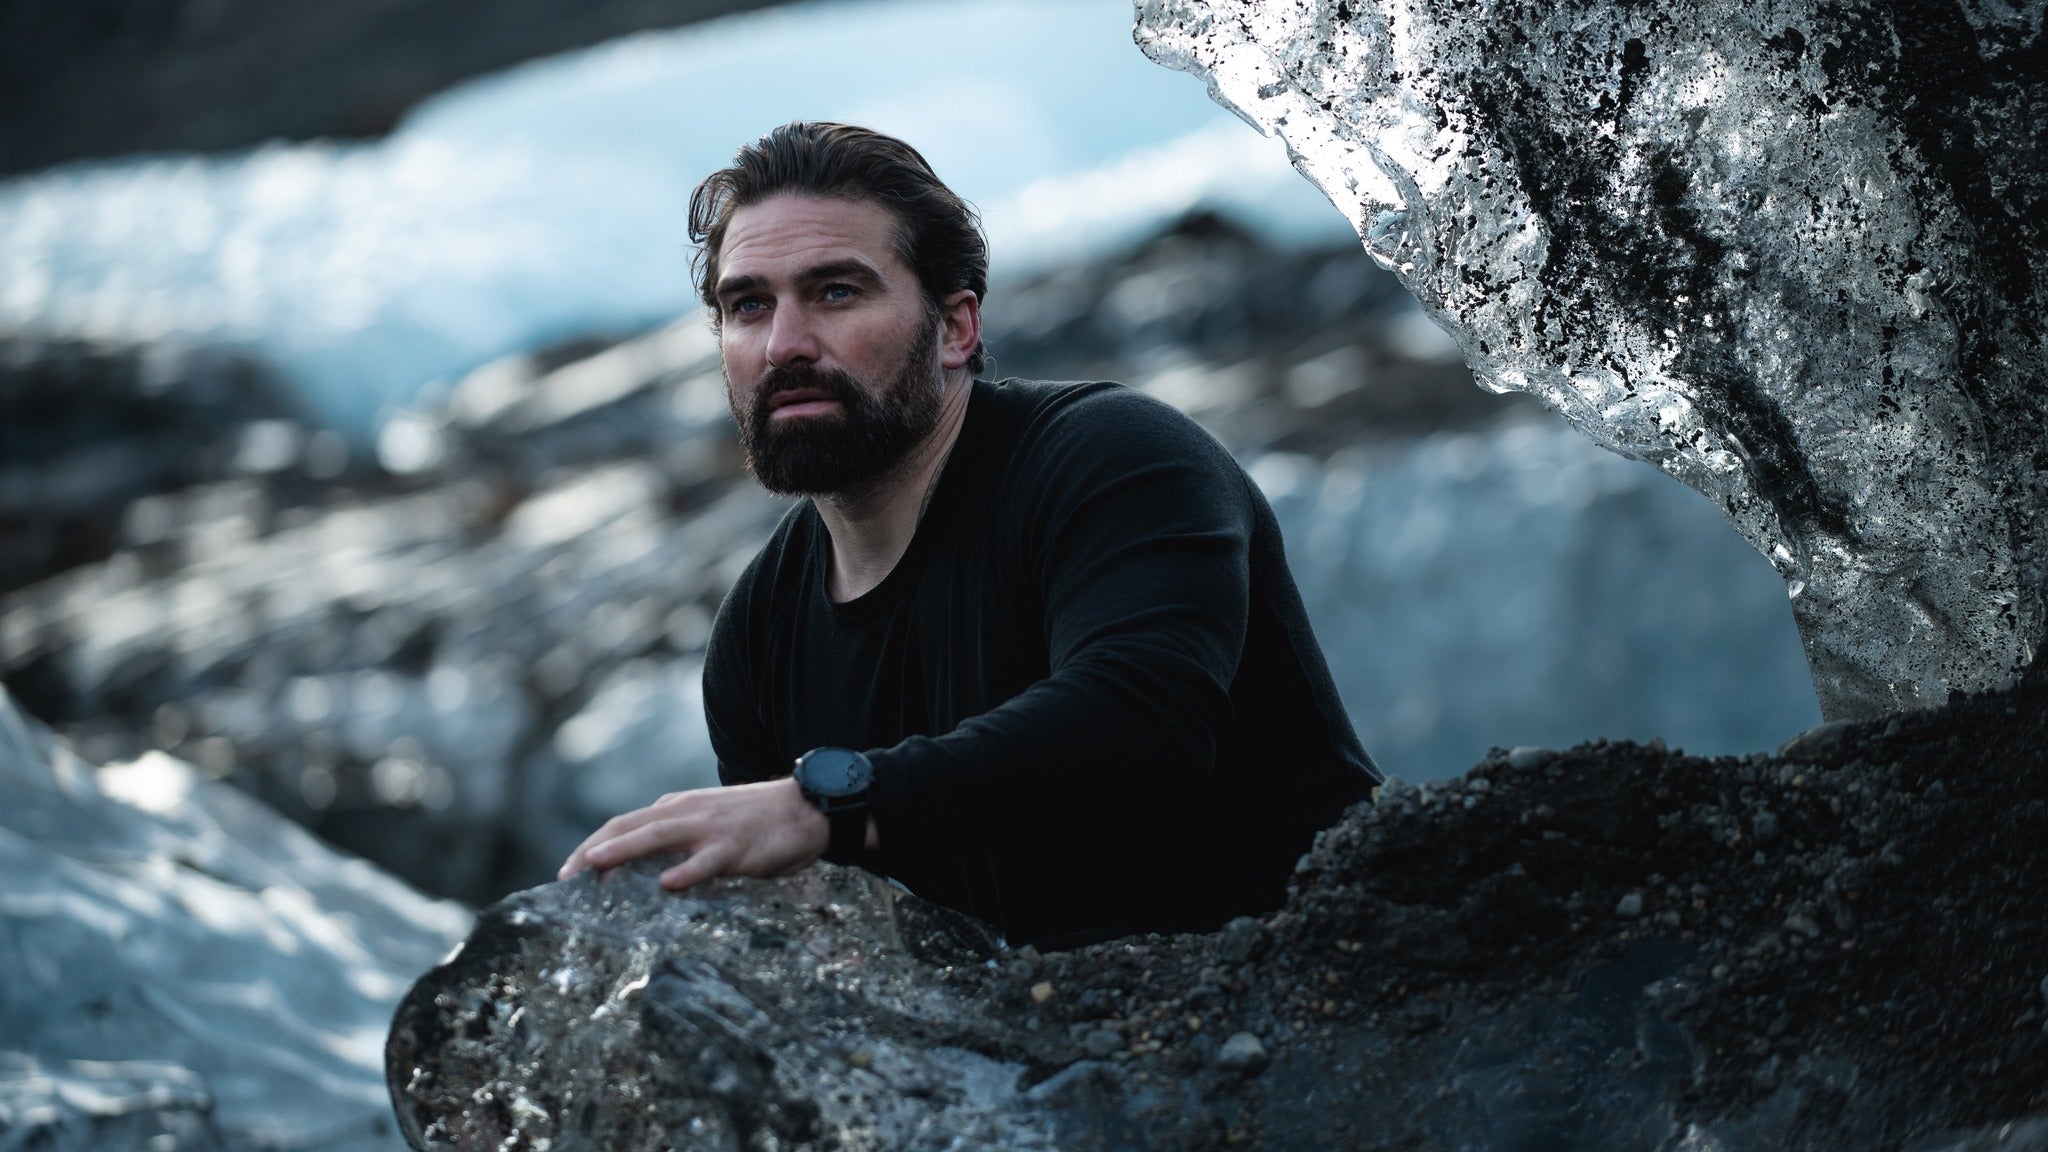 Ant Middleton - Mind Over Muscle